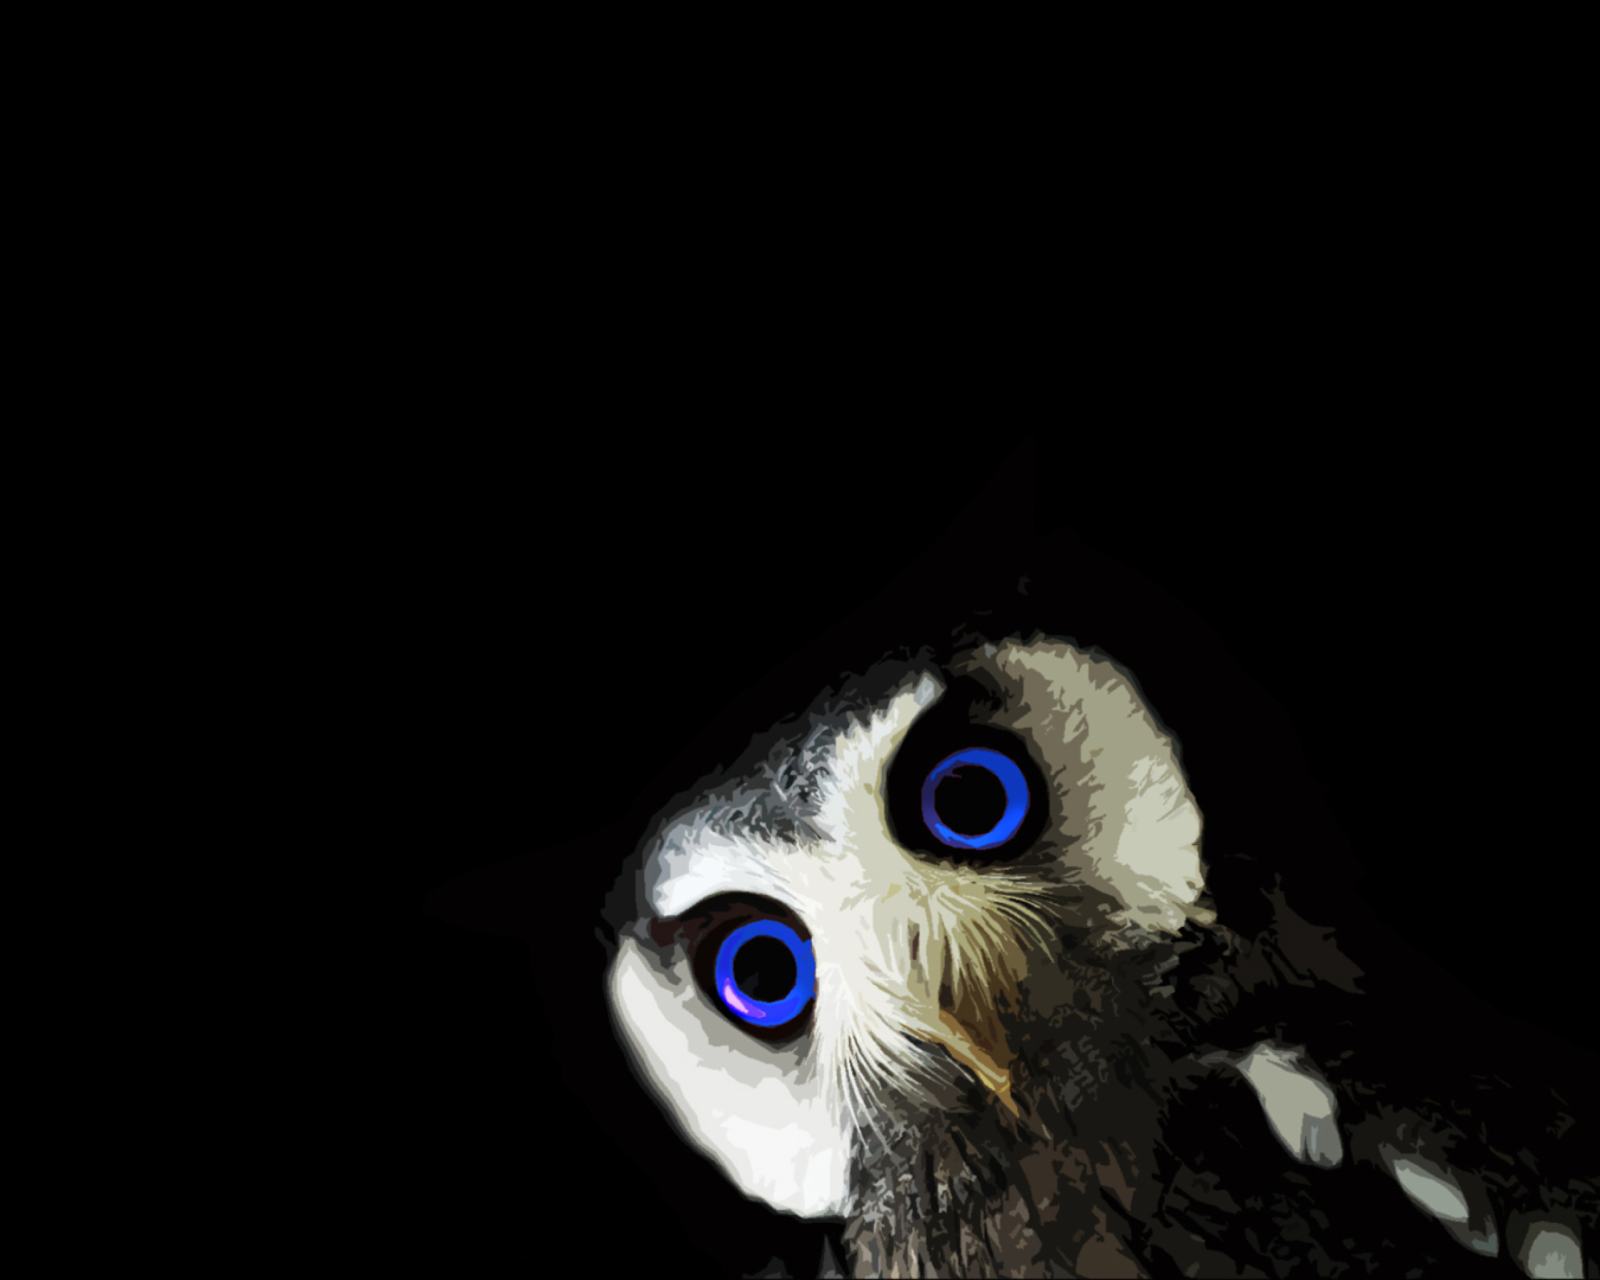 Funny Owl With Big Blue Eyes wallpaper 1600x1280